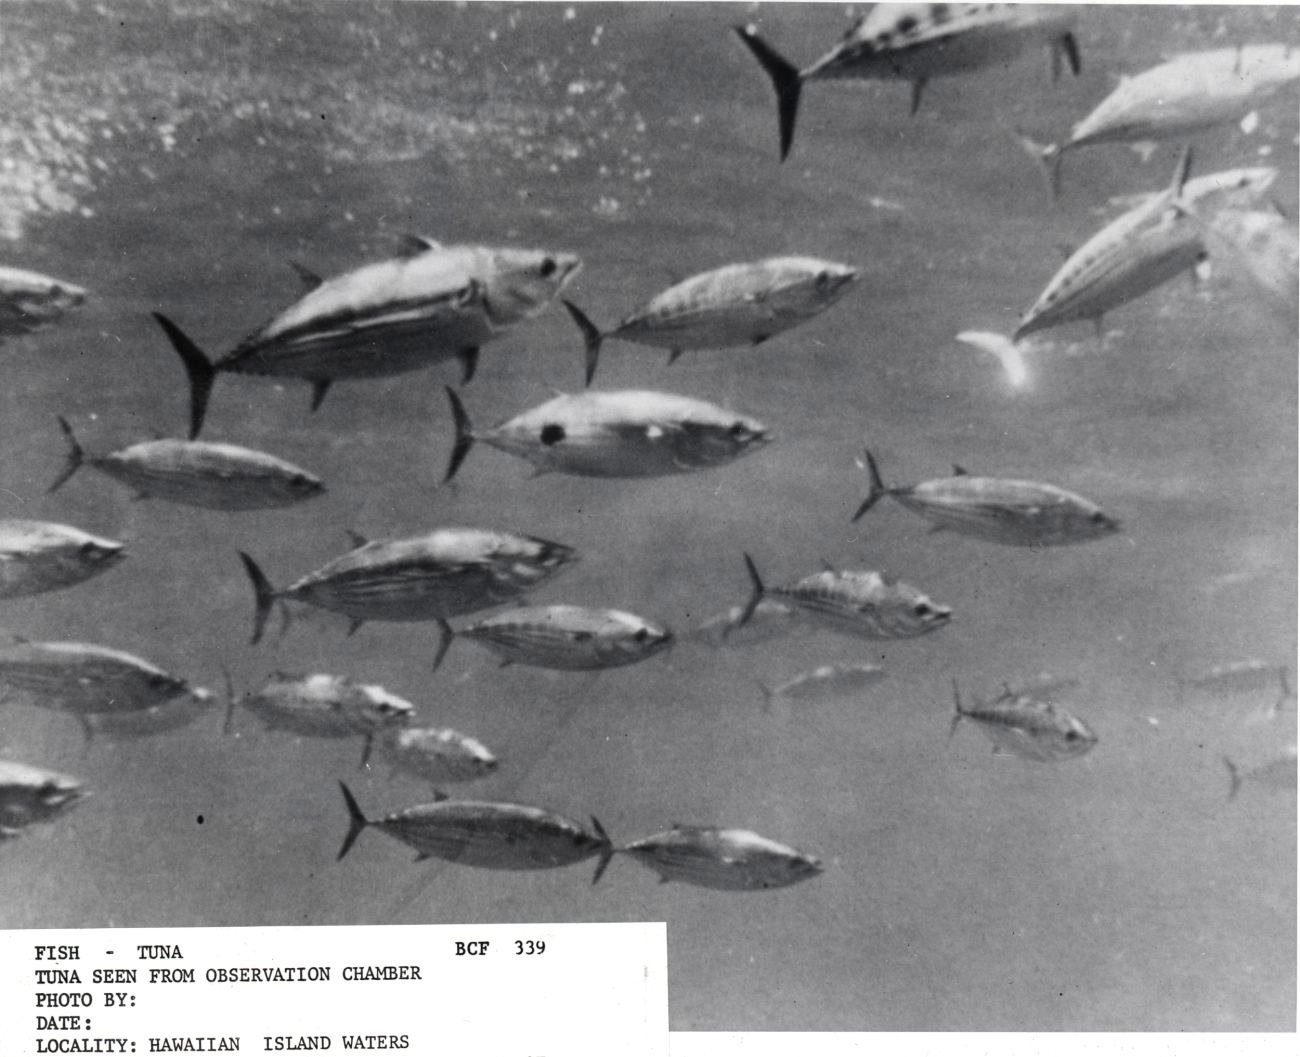 Tuna seen from observation chamber of BCF research vessel